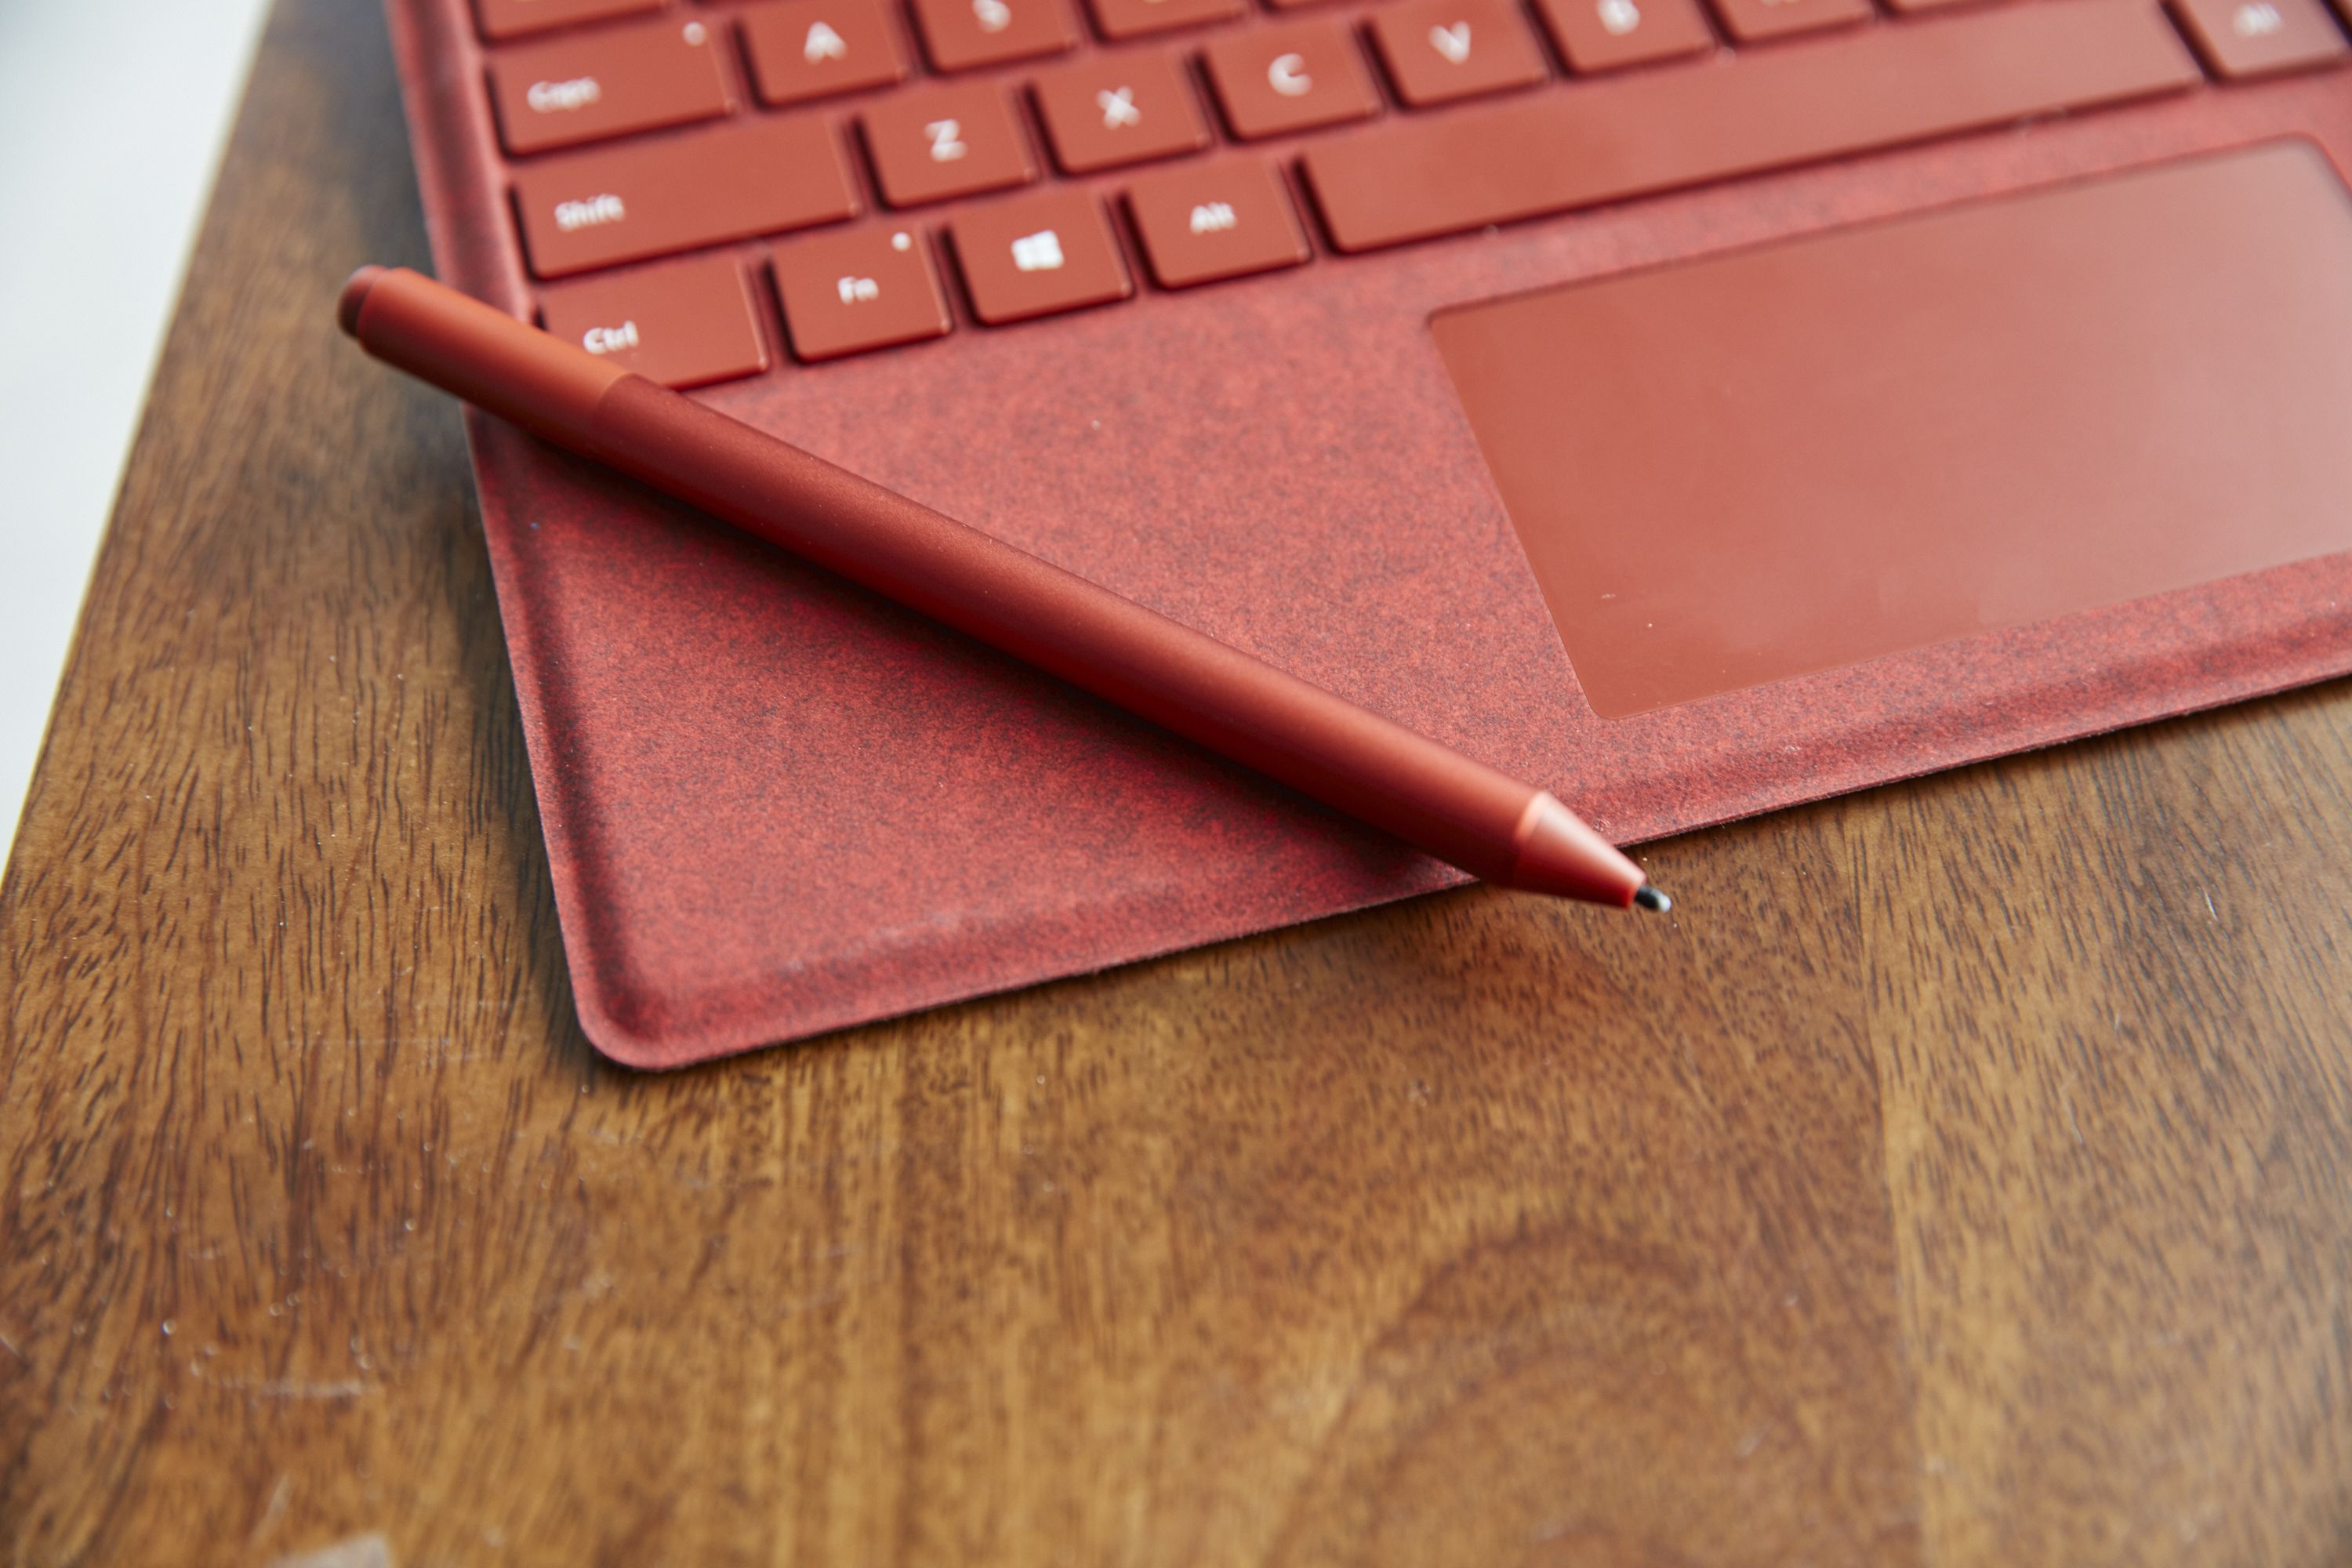 Surface Pro 7 Review  Surface Pro 7 Editor's Choice